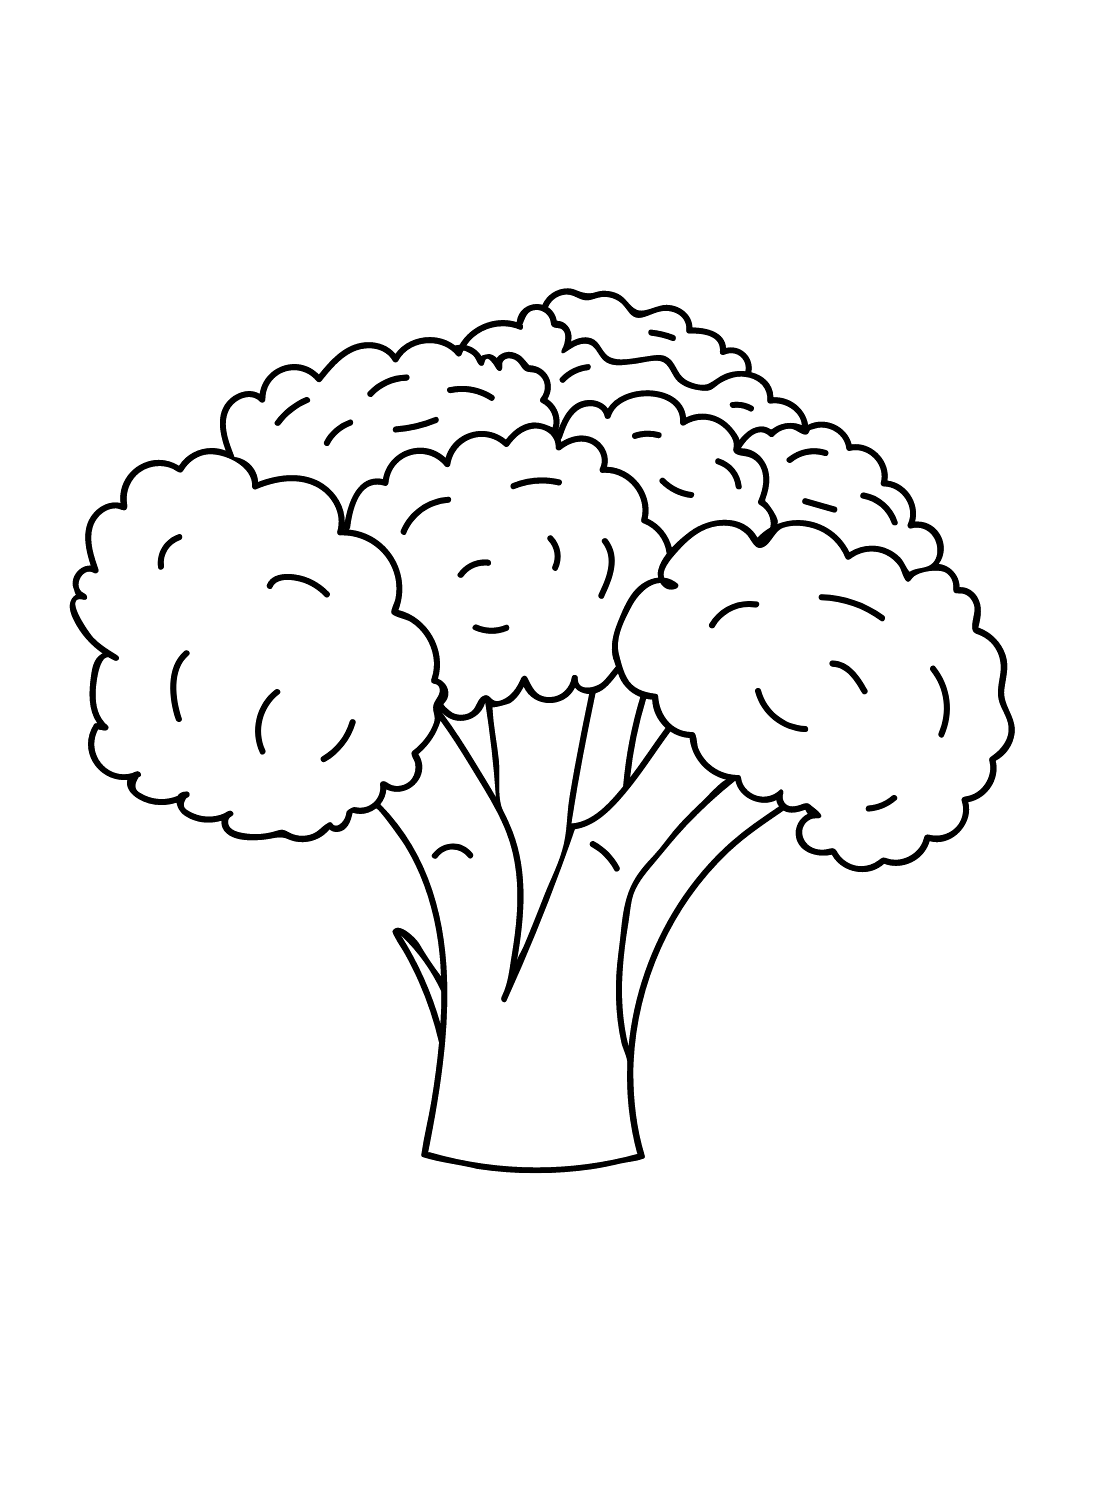 Broccoli to Download Coloring Pages